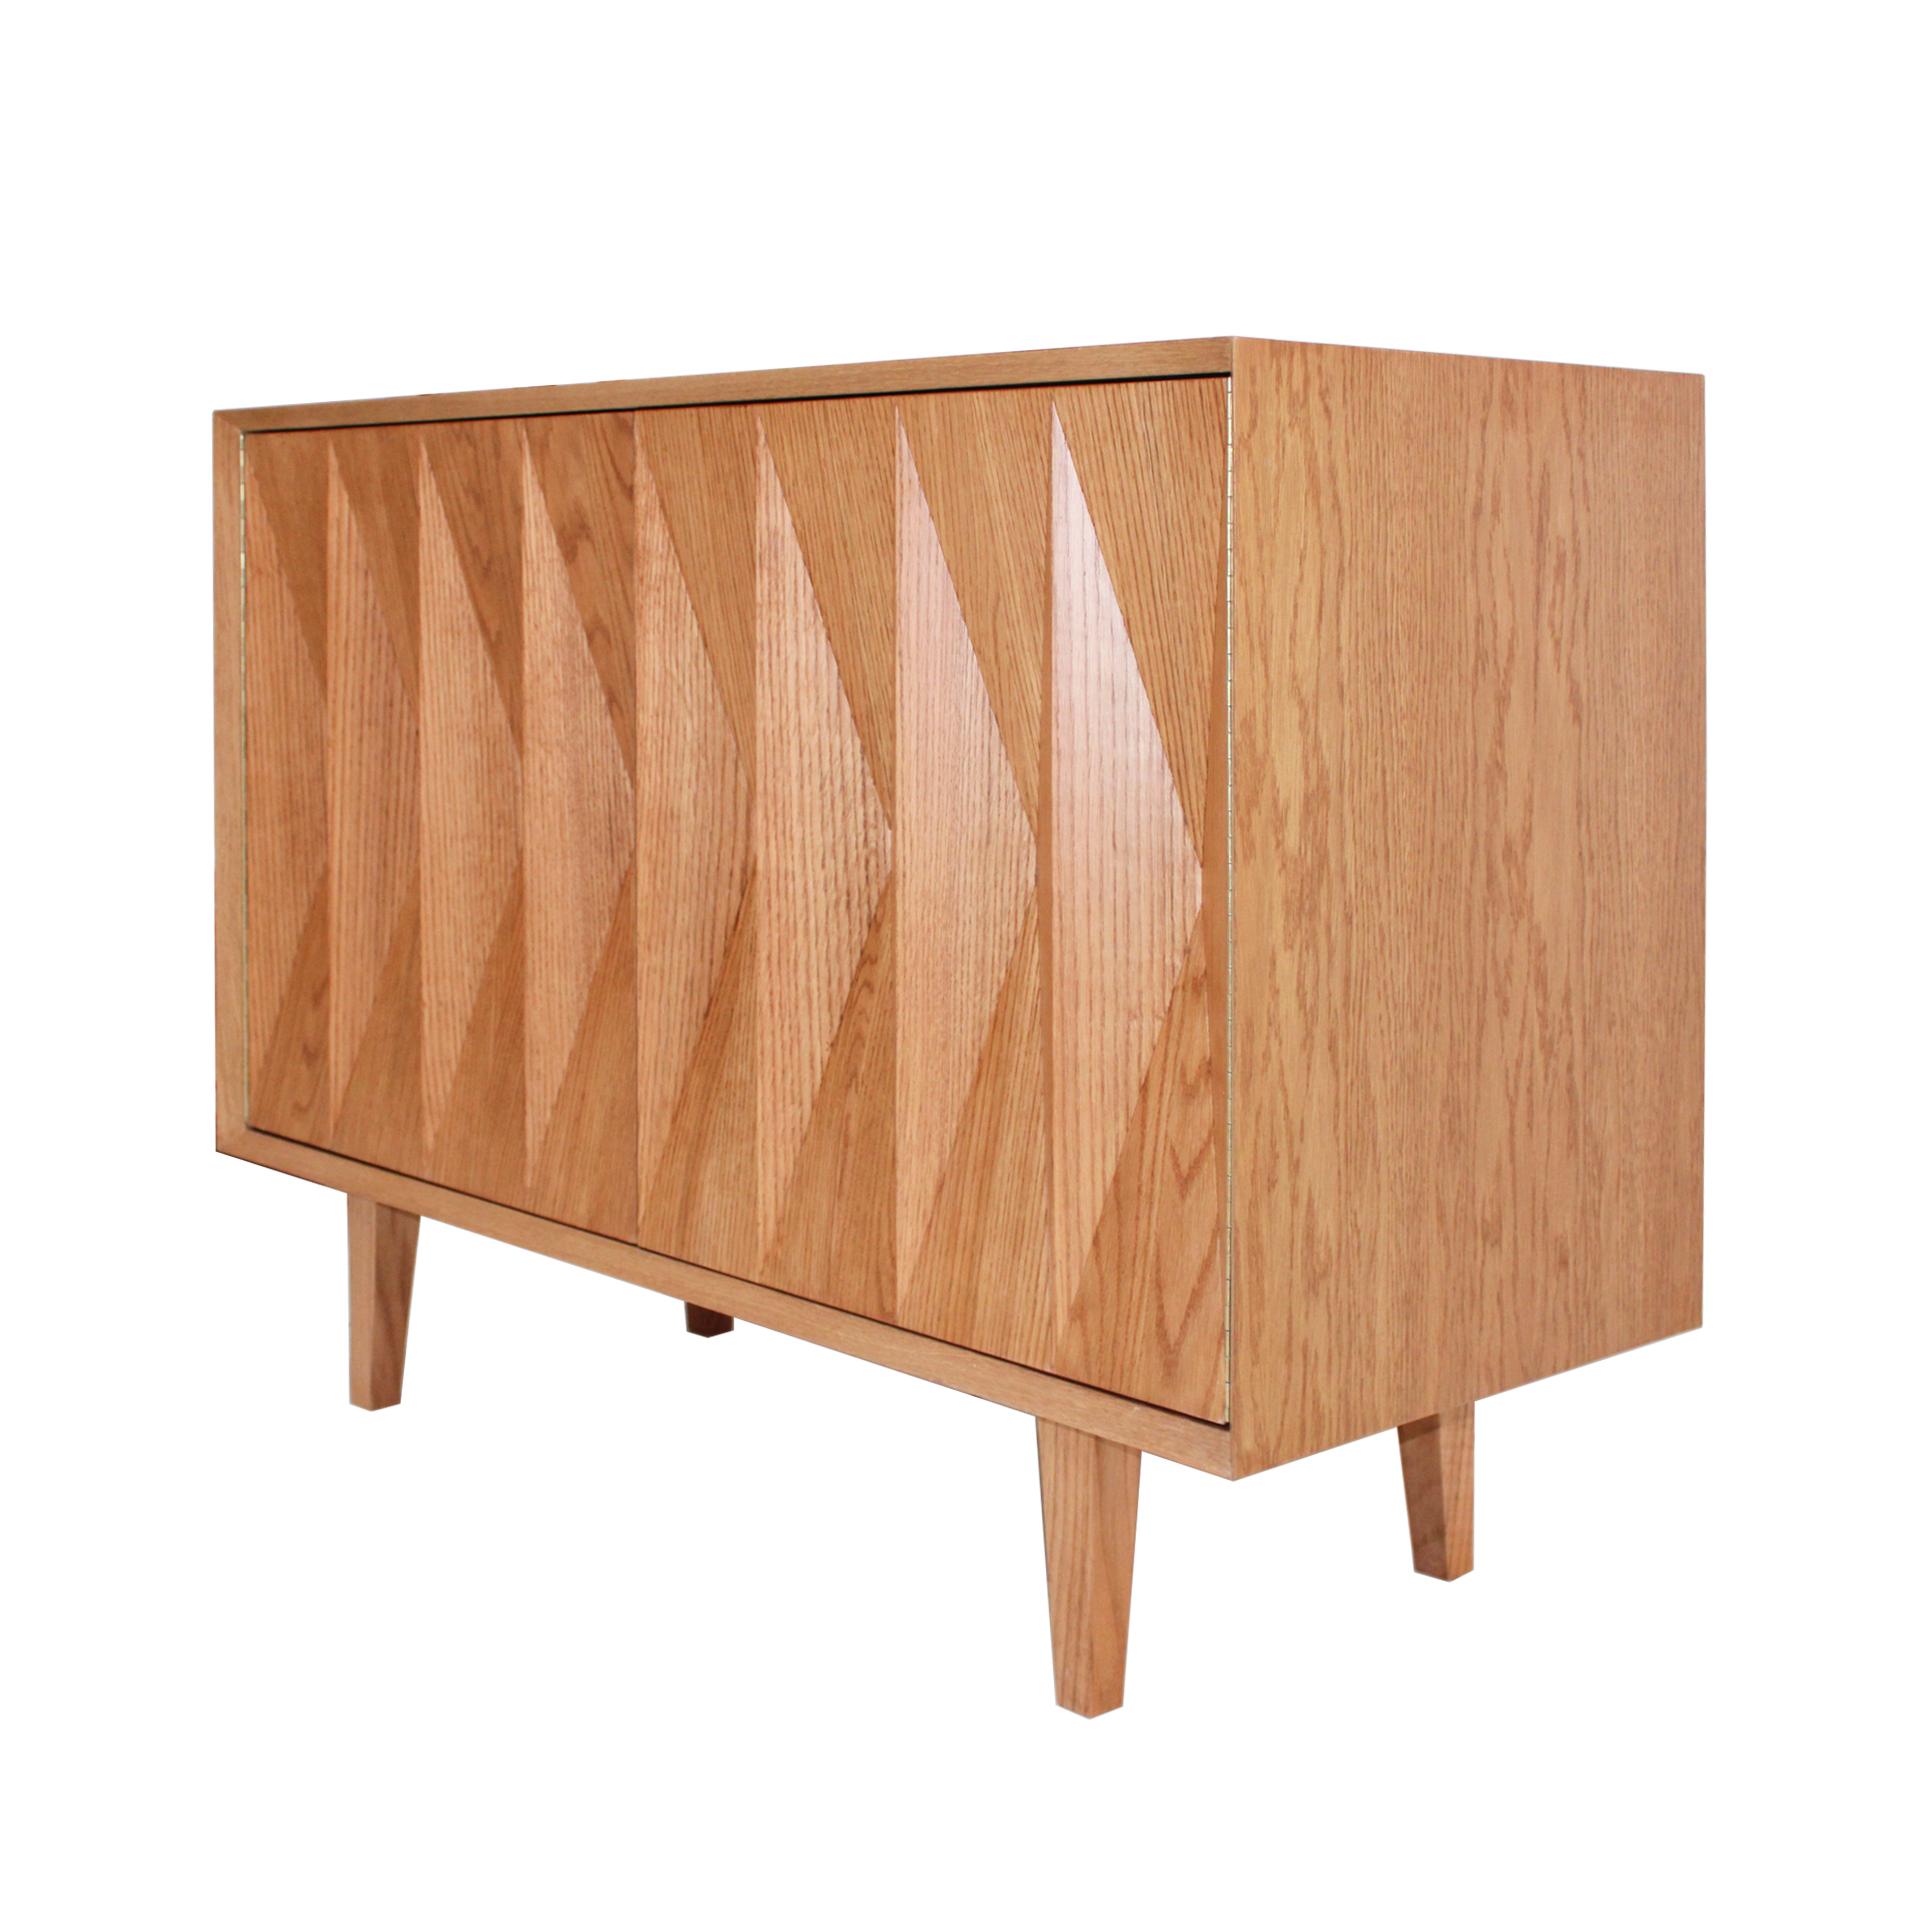 Contemporary Mid-Century Modern Style Oak Wood Pair of Italian Sideboards by L.a Studio For Sale